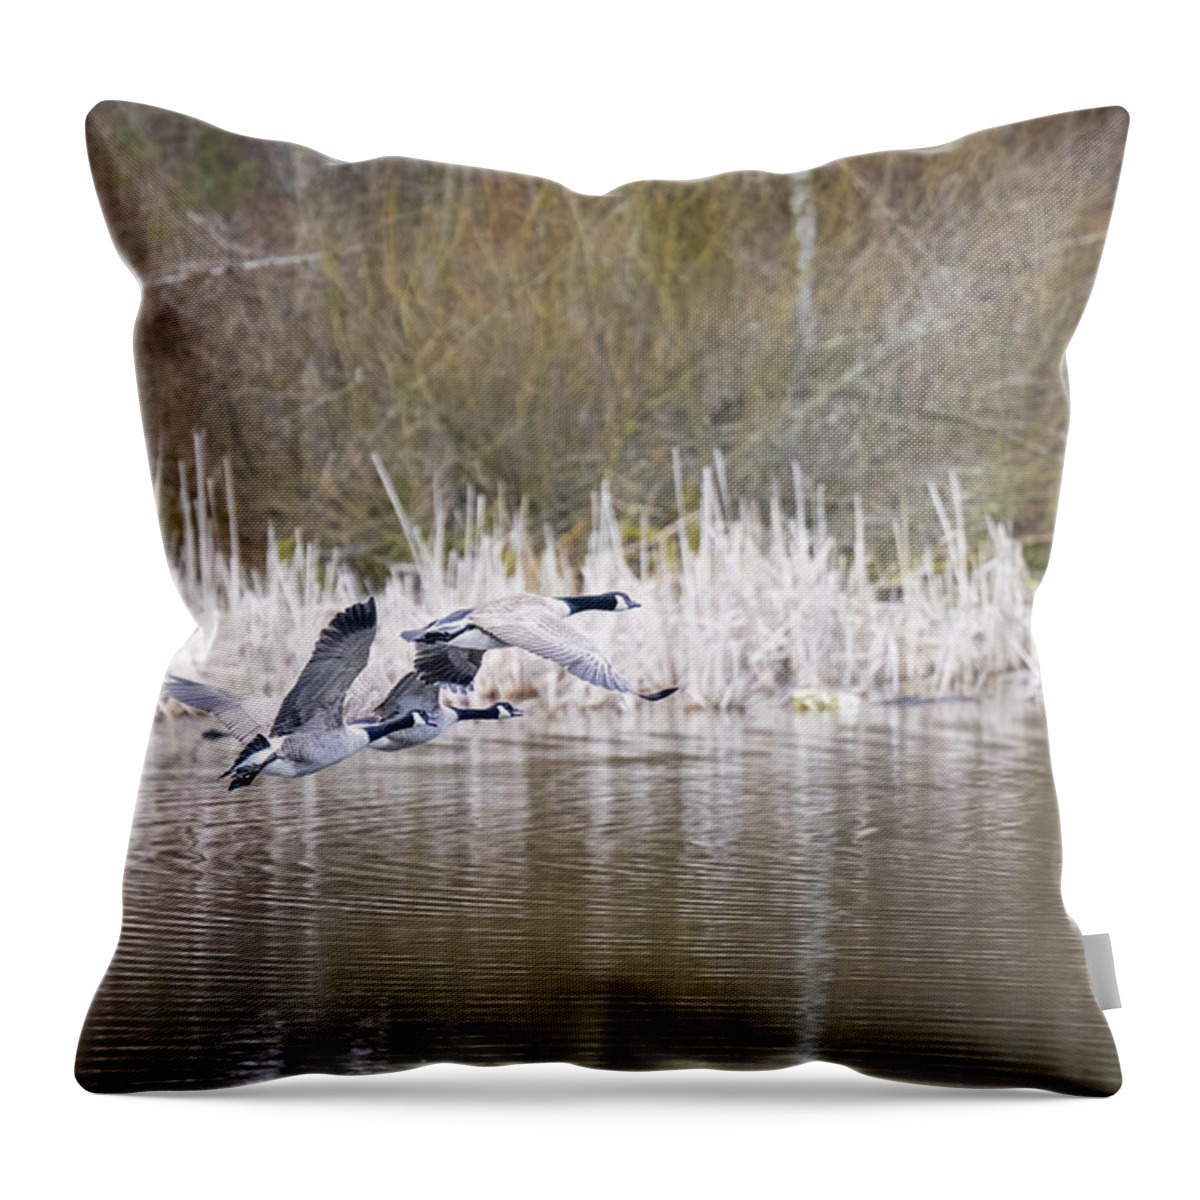 Geese Throw Pillow featuring the photograph Canada Geese by Jerry Cahill